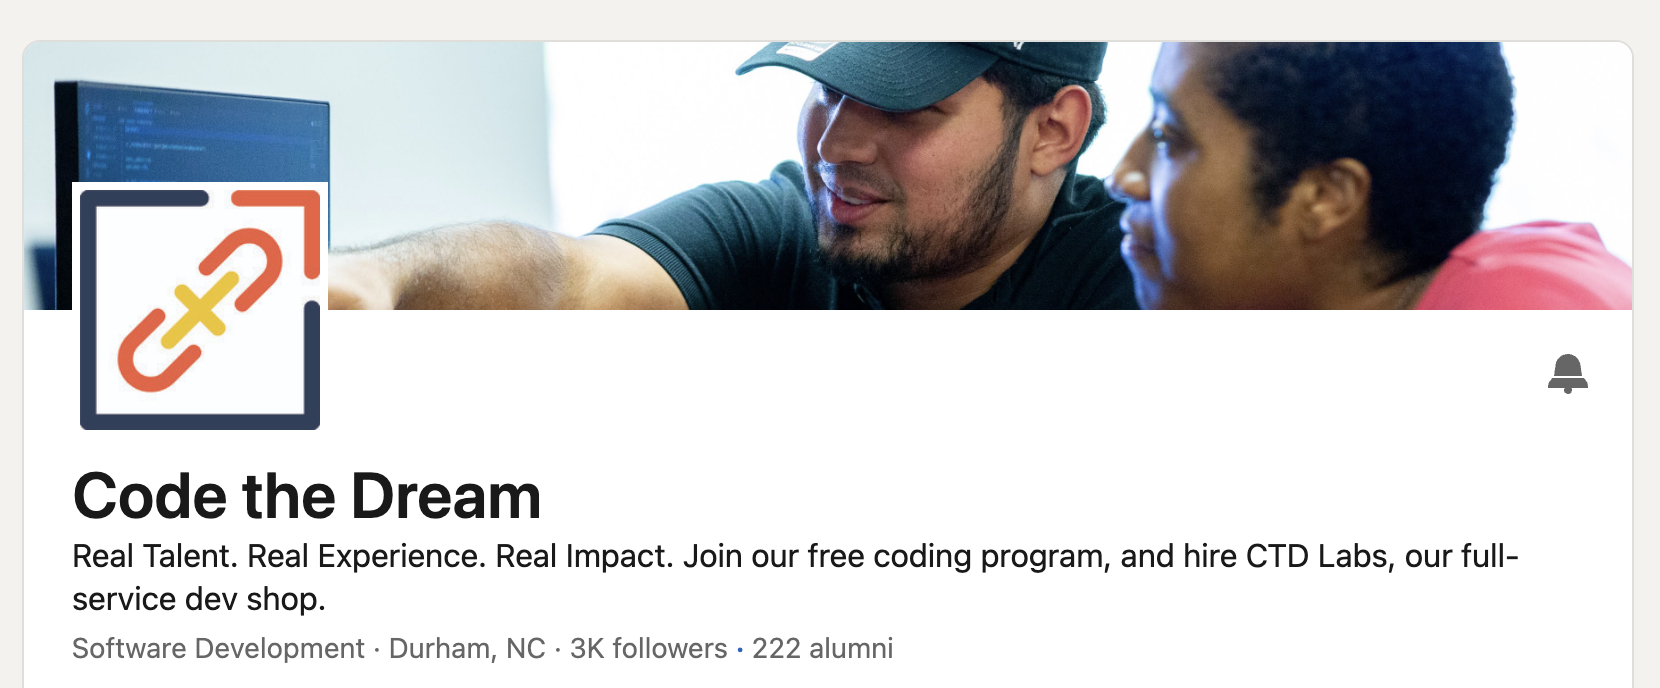 Code the Dream LinkedIn page